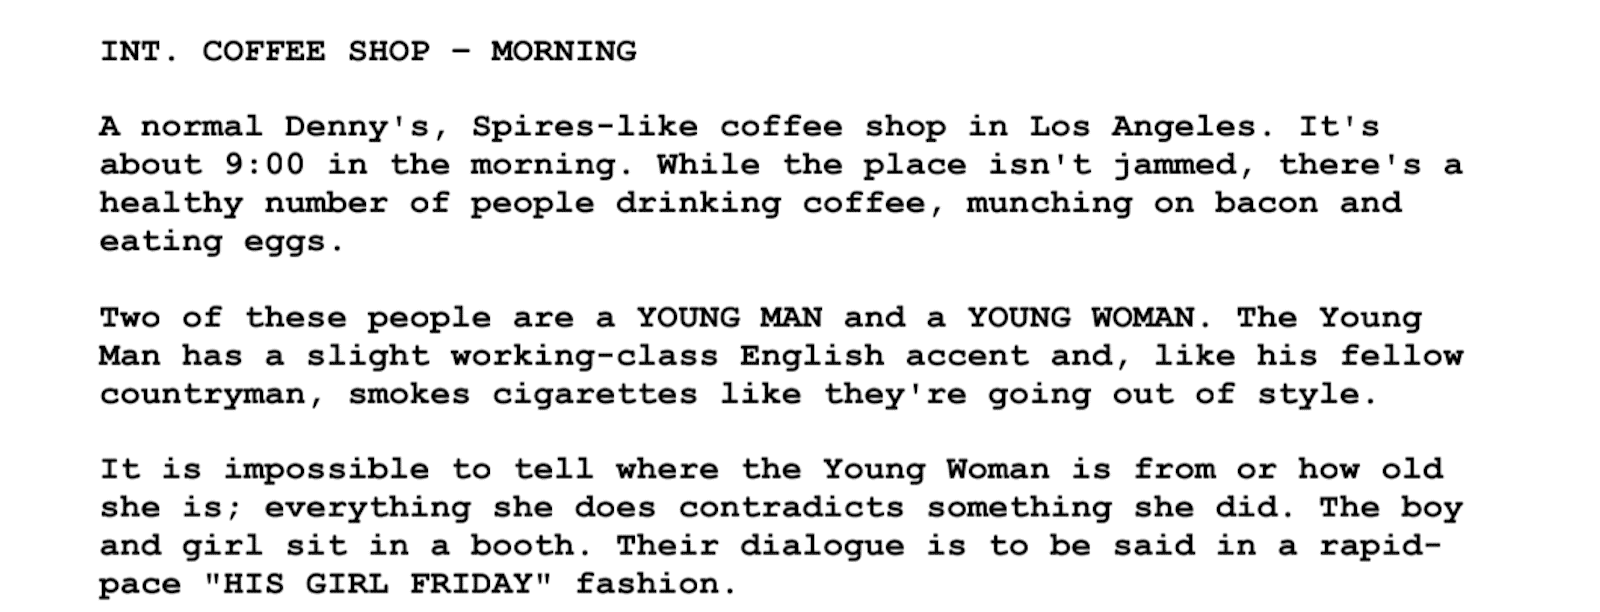 Screenplay Examples - Pulp Fiction Script - Screenplay Snippet 15 - Coffee Shop